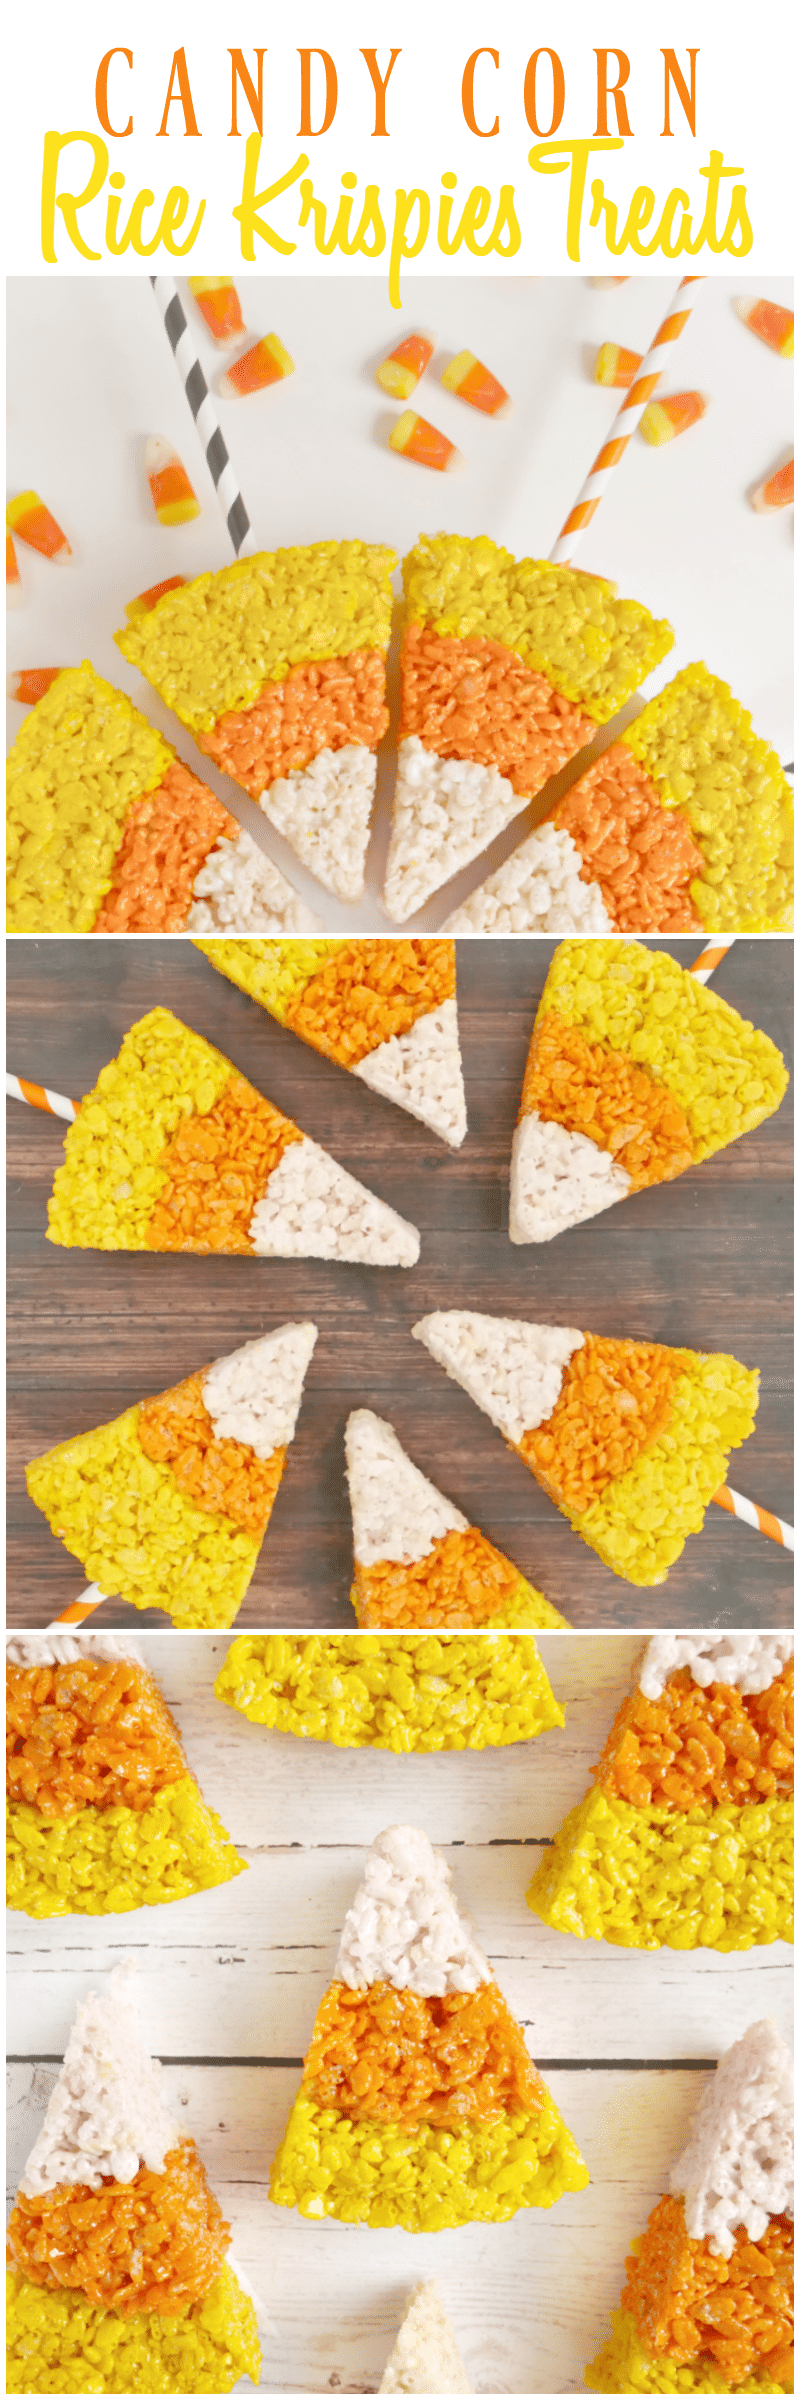 Candy Corn Rice Krispies Treats - these are a HUGE hit with kids and adults!